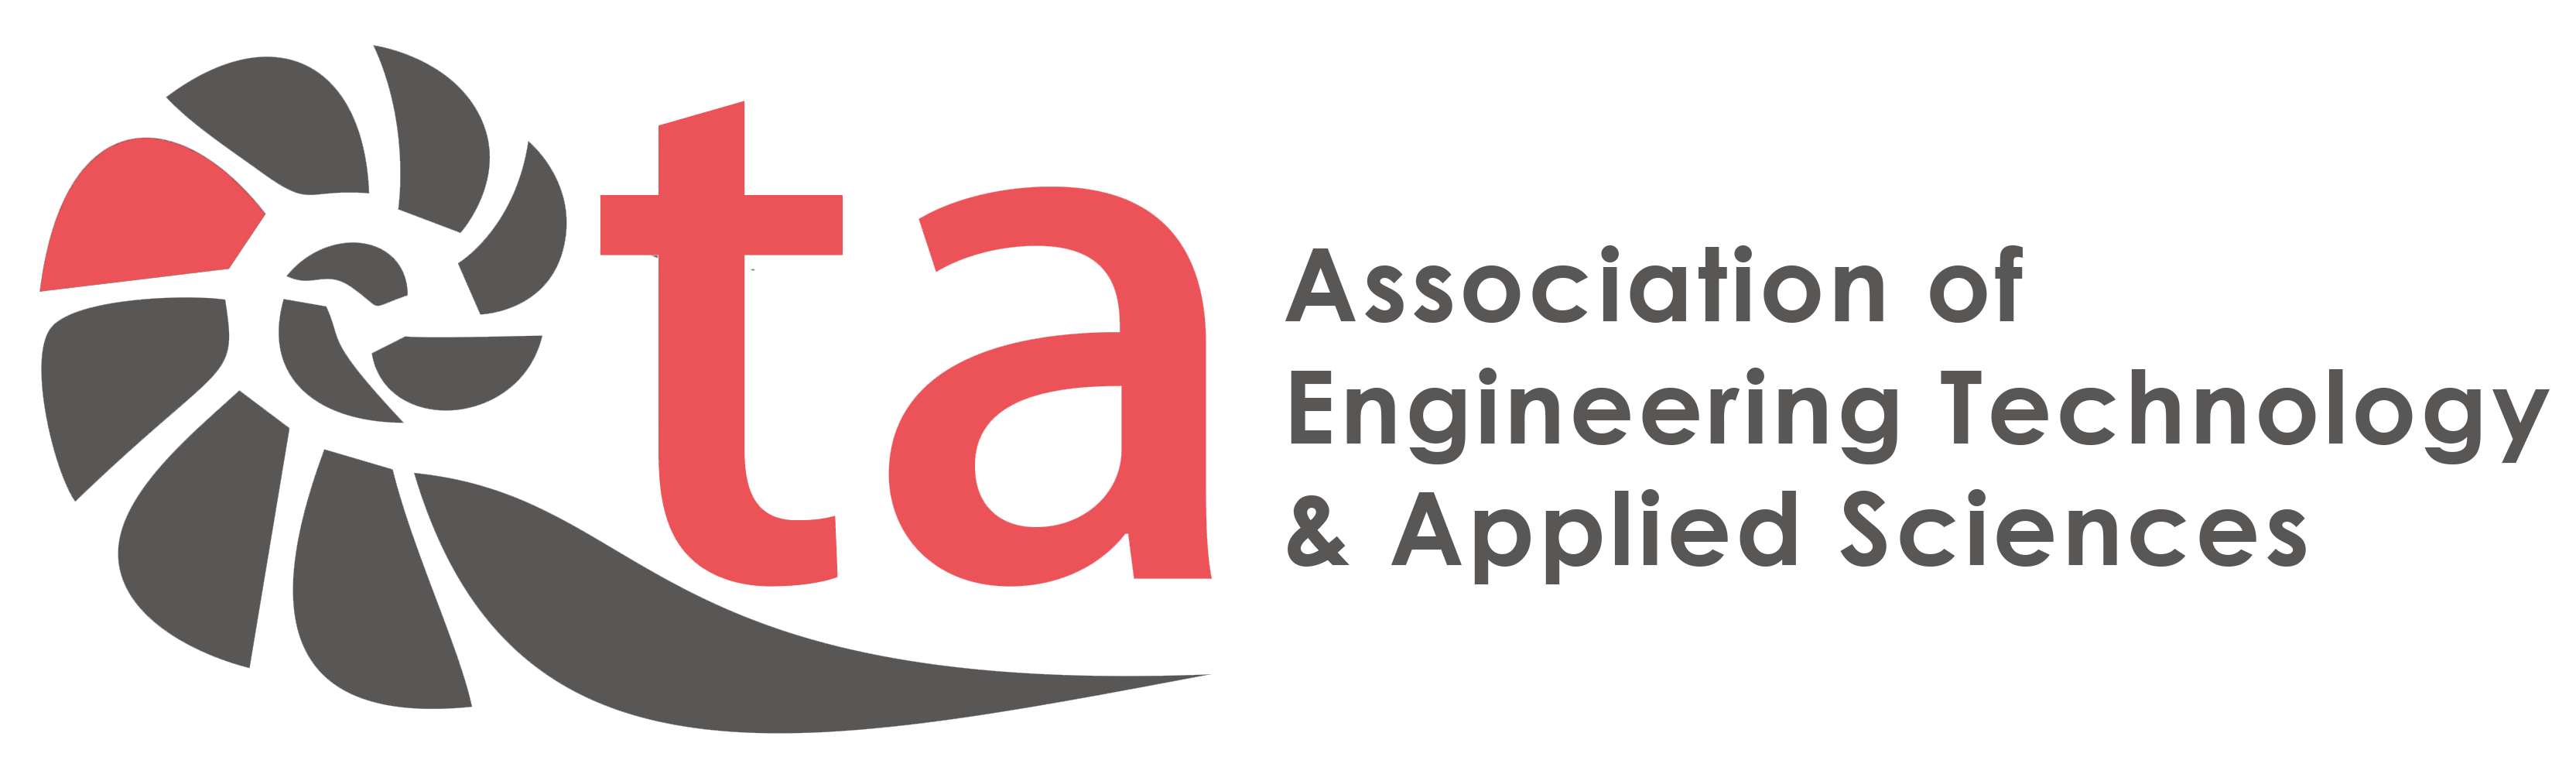 AETA 3rd International Conference on Computer Software and Applications, Engineering, Applied Science Research & Data Management CSAD